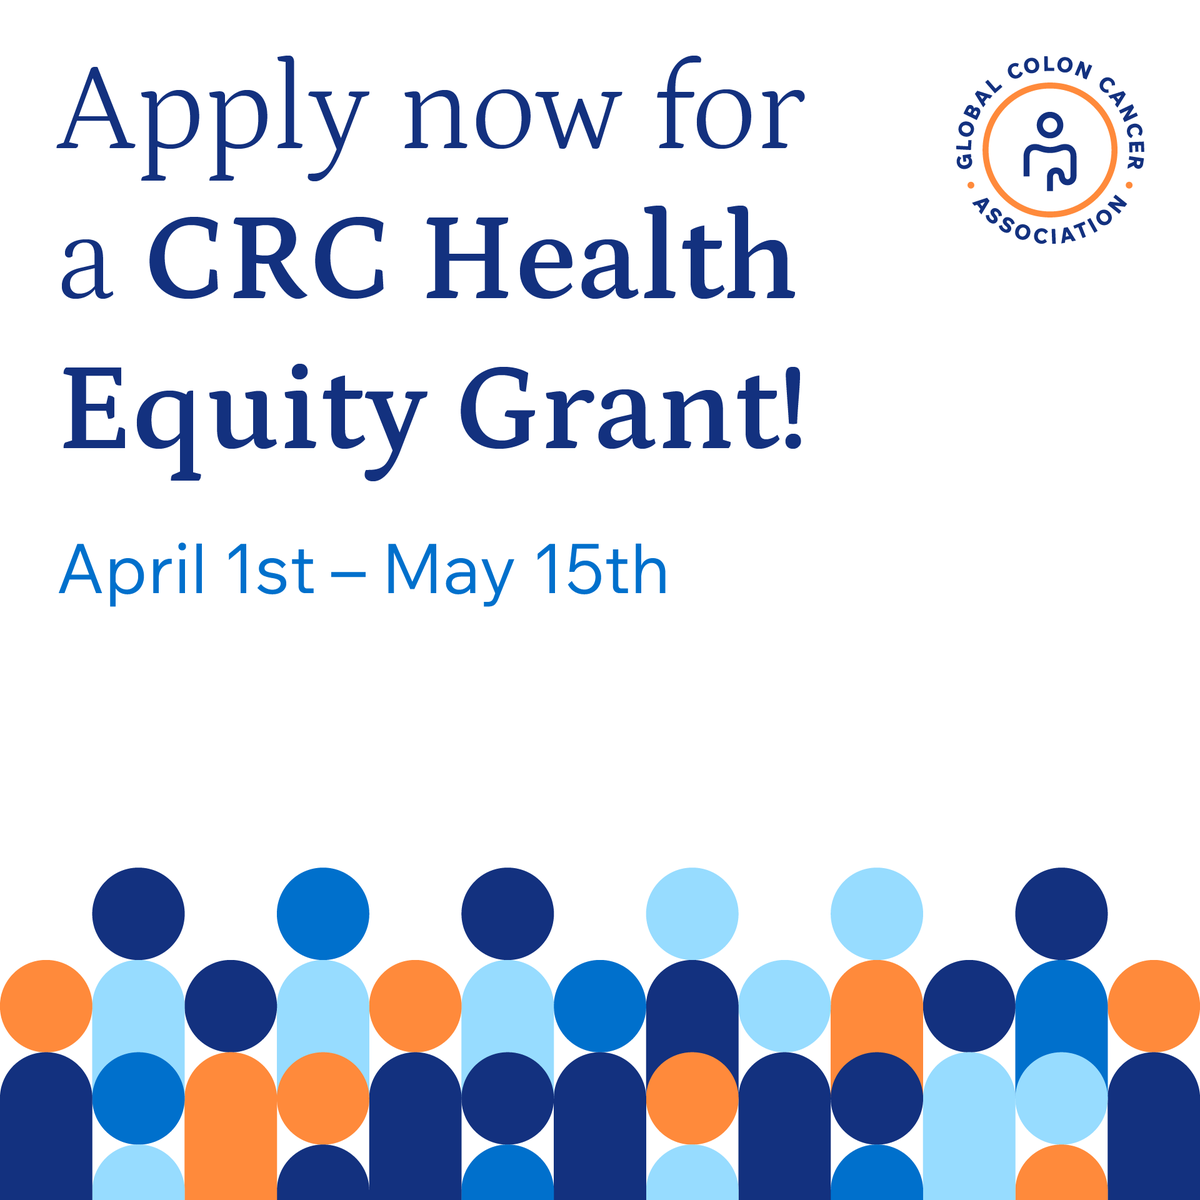 One week left! Apply now for a CRC Health Equity Grant. #crchealthequitygrants Learn more: gcca.info/_HEG_24_Open_ #colorectalcancer #bowelcancer